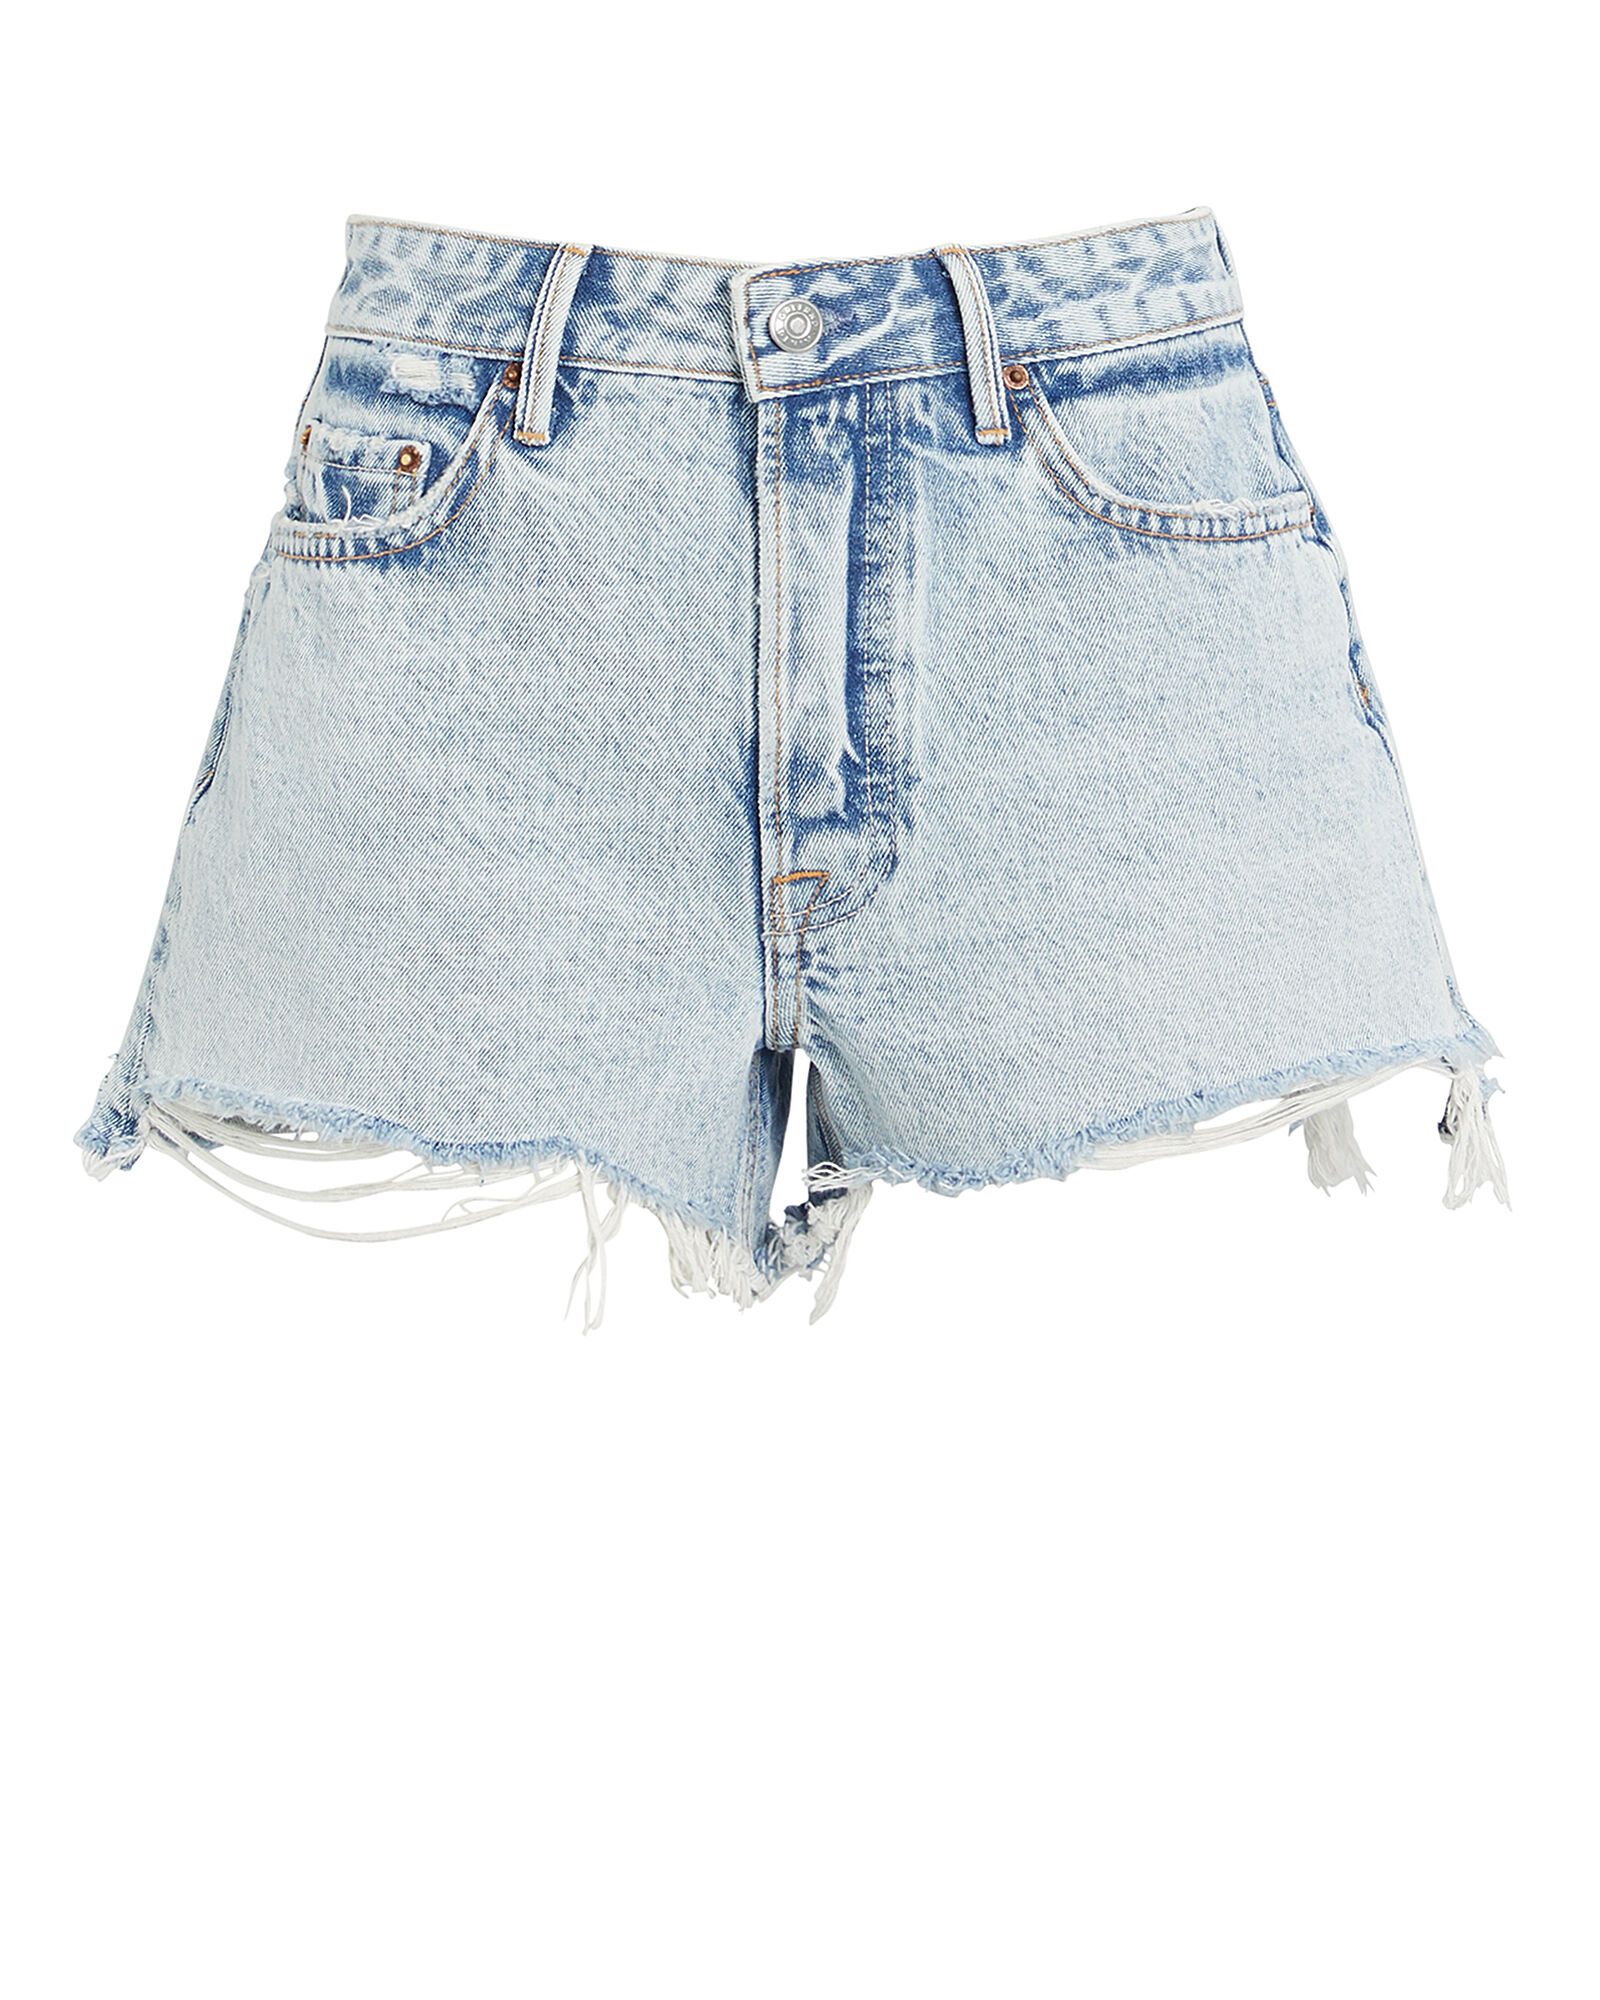 best ripped jean shorts